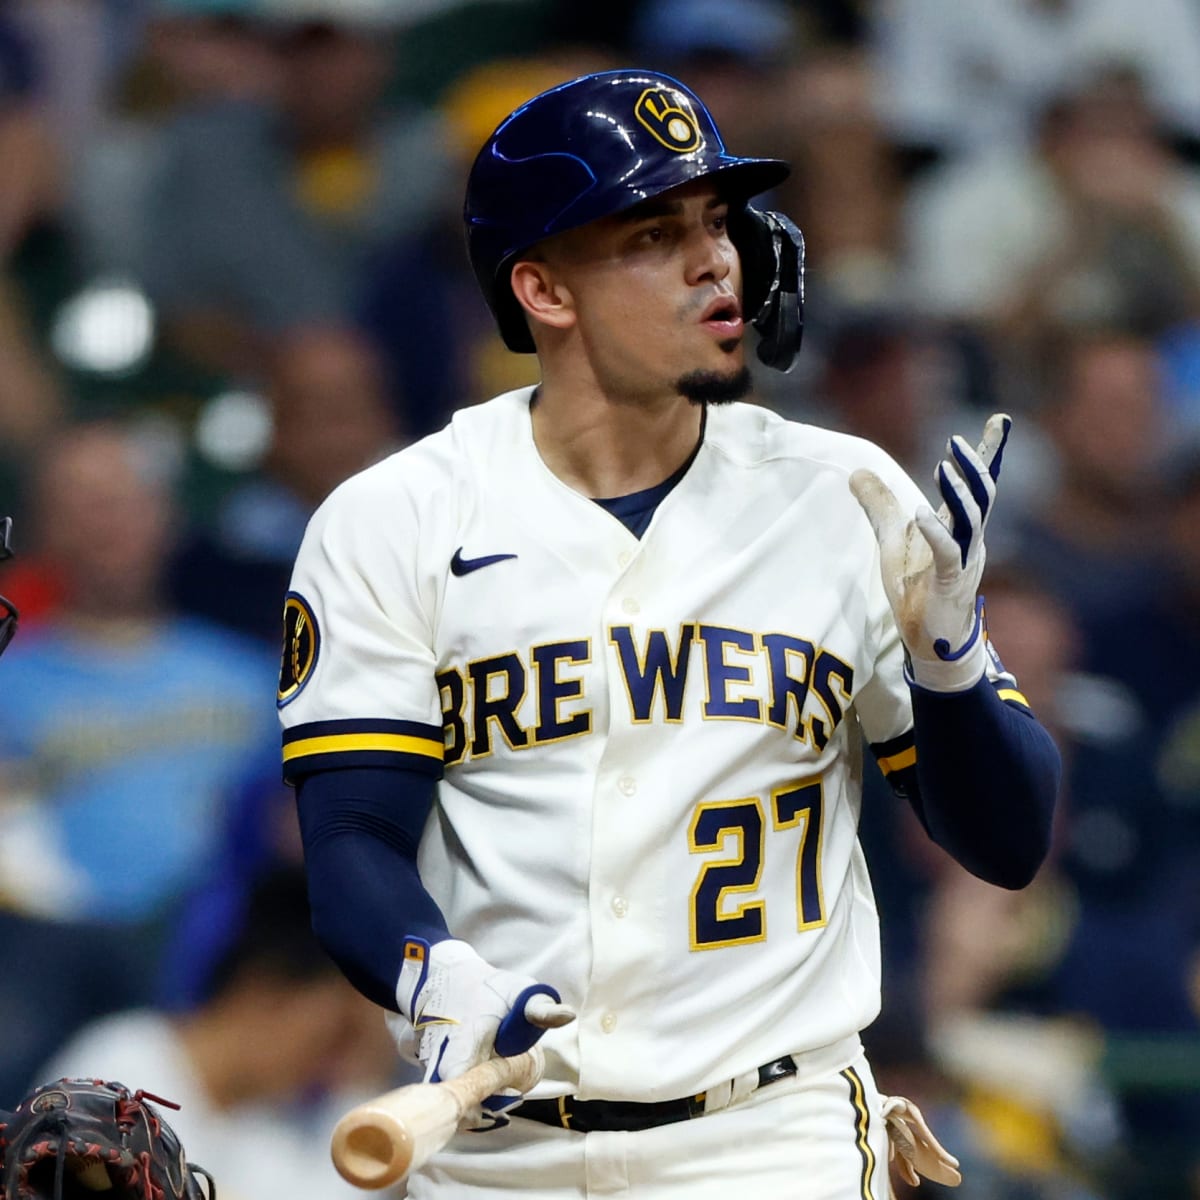 In photos: MLB: Milwaukee Brewers lose to St. Louis Cardinals but